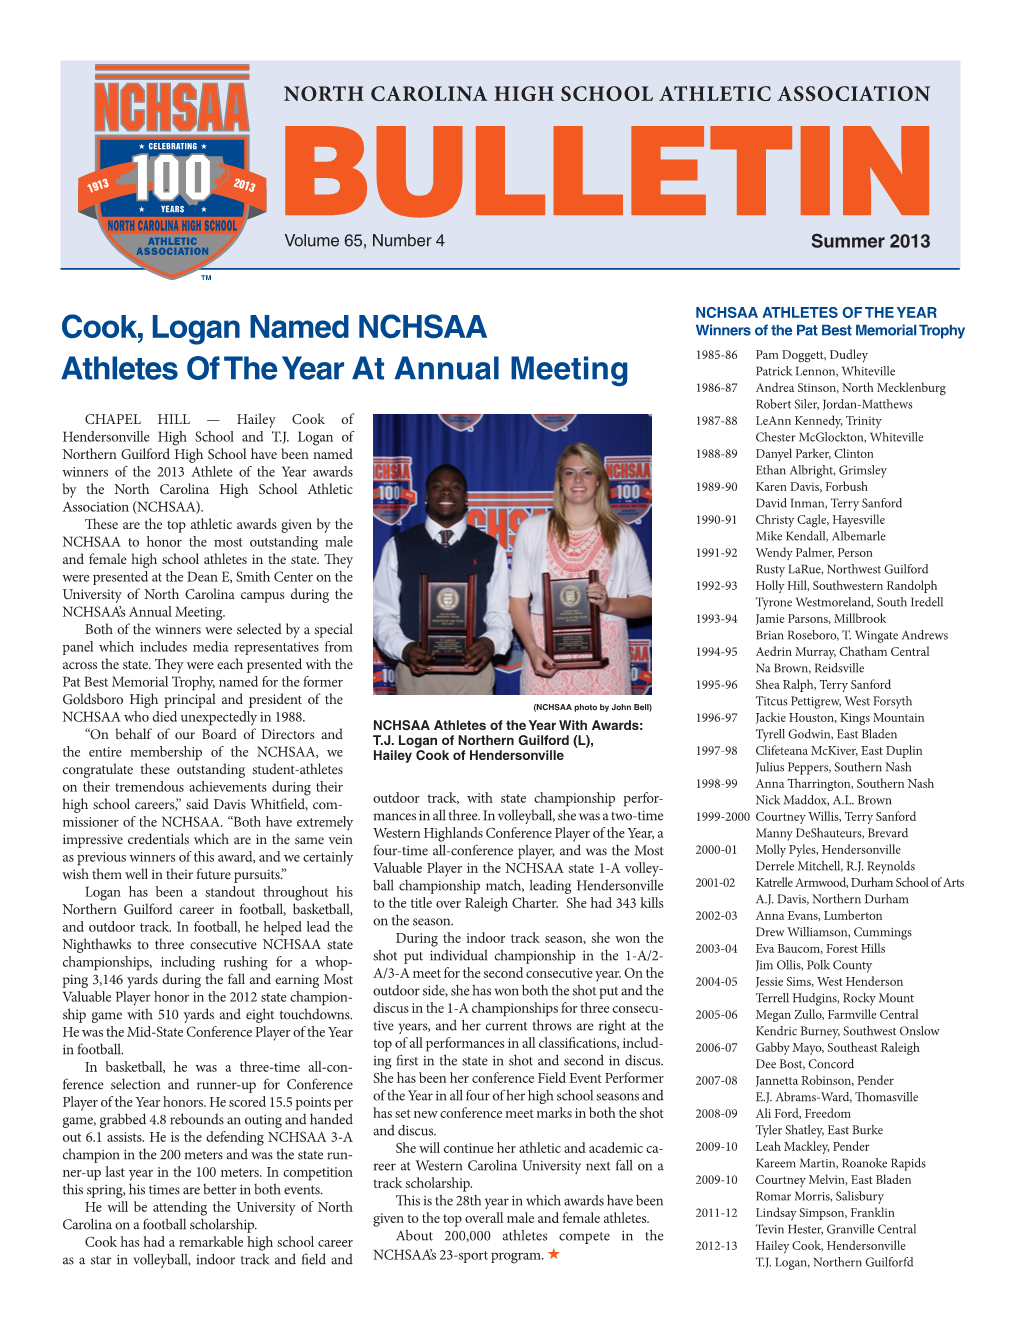 Cook, Logan Named NCHSAA Athletes of the Year at Annual Meeting